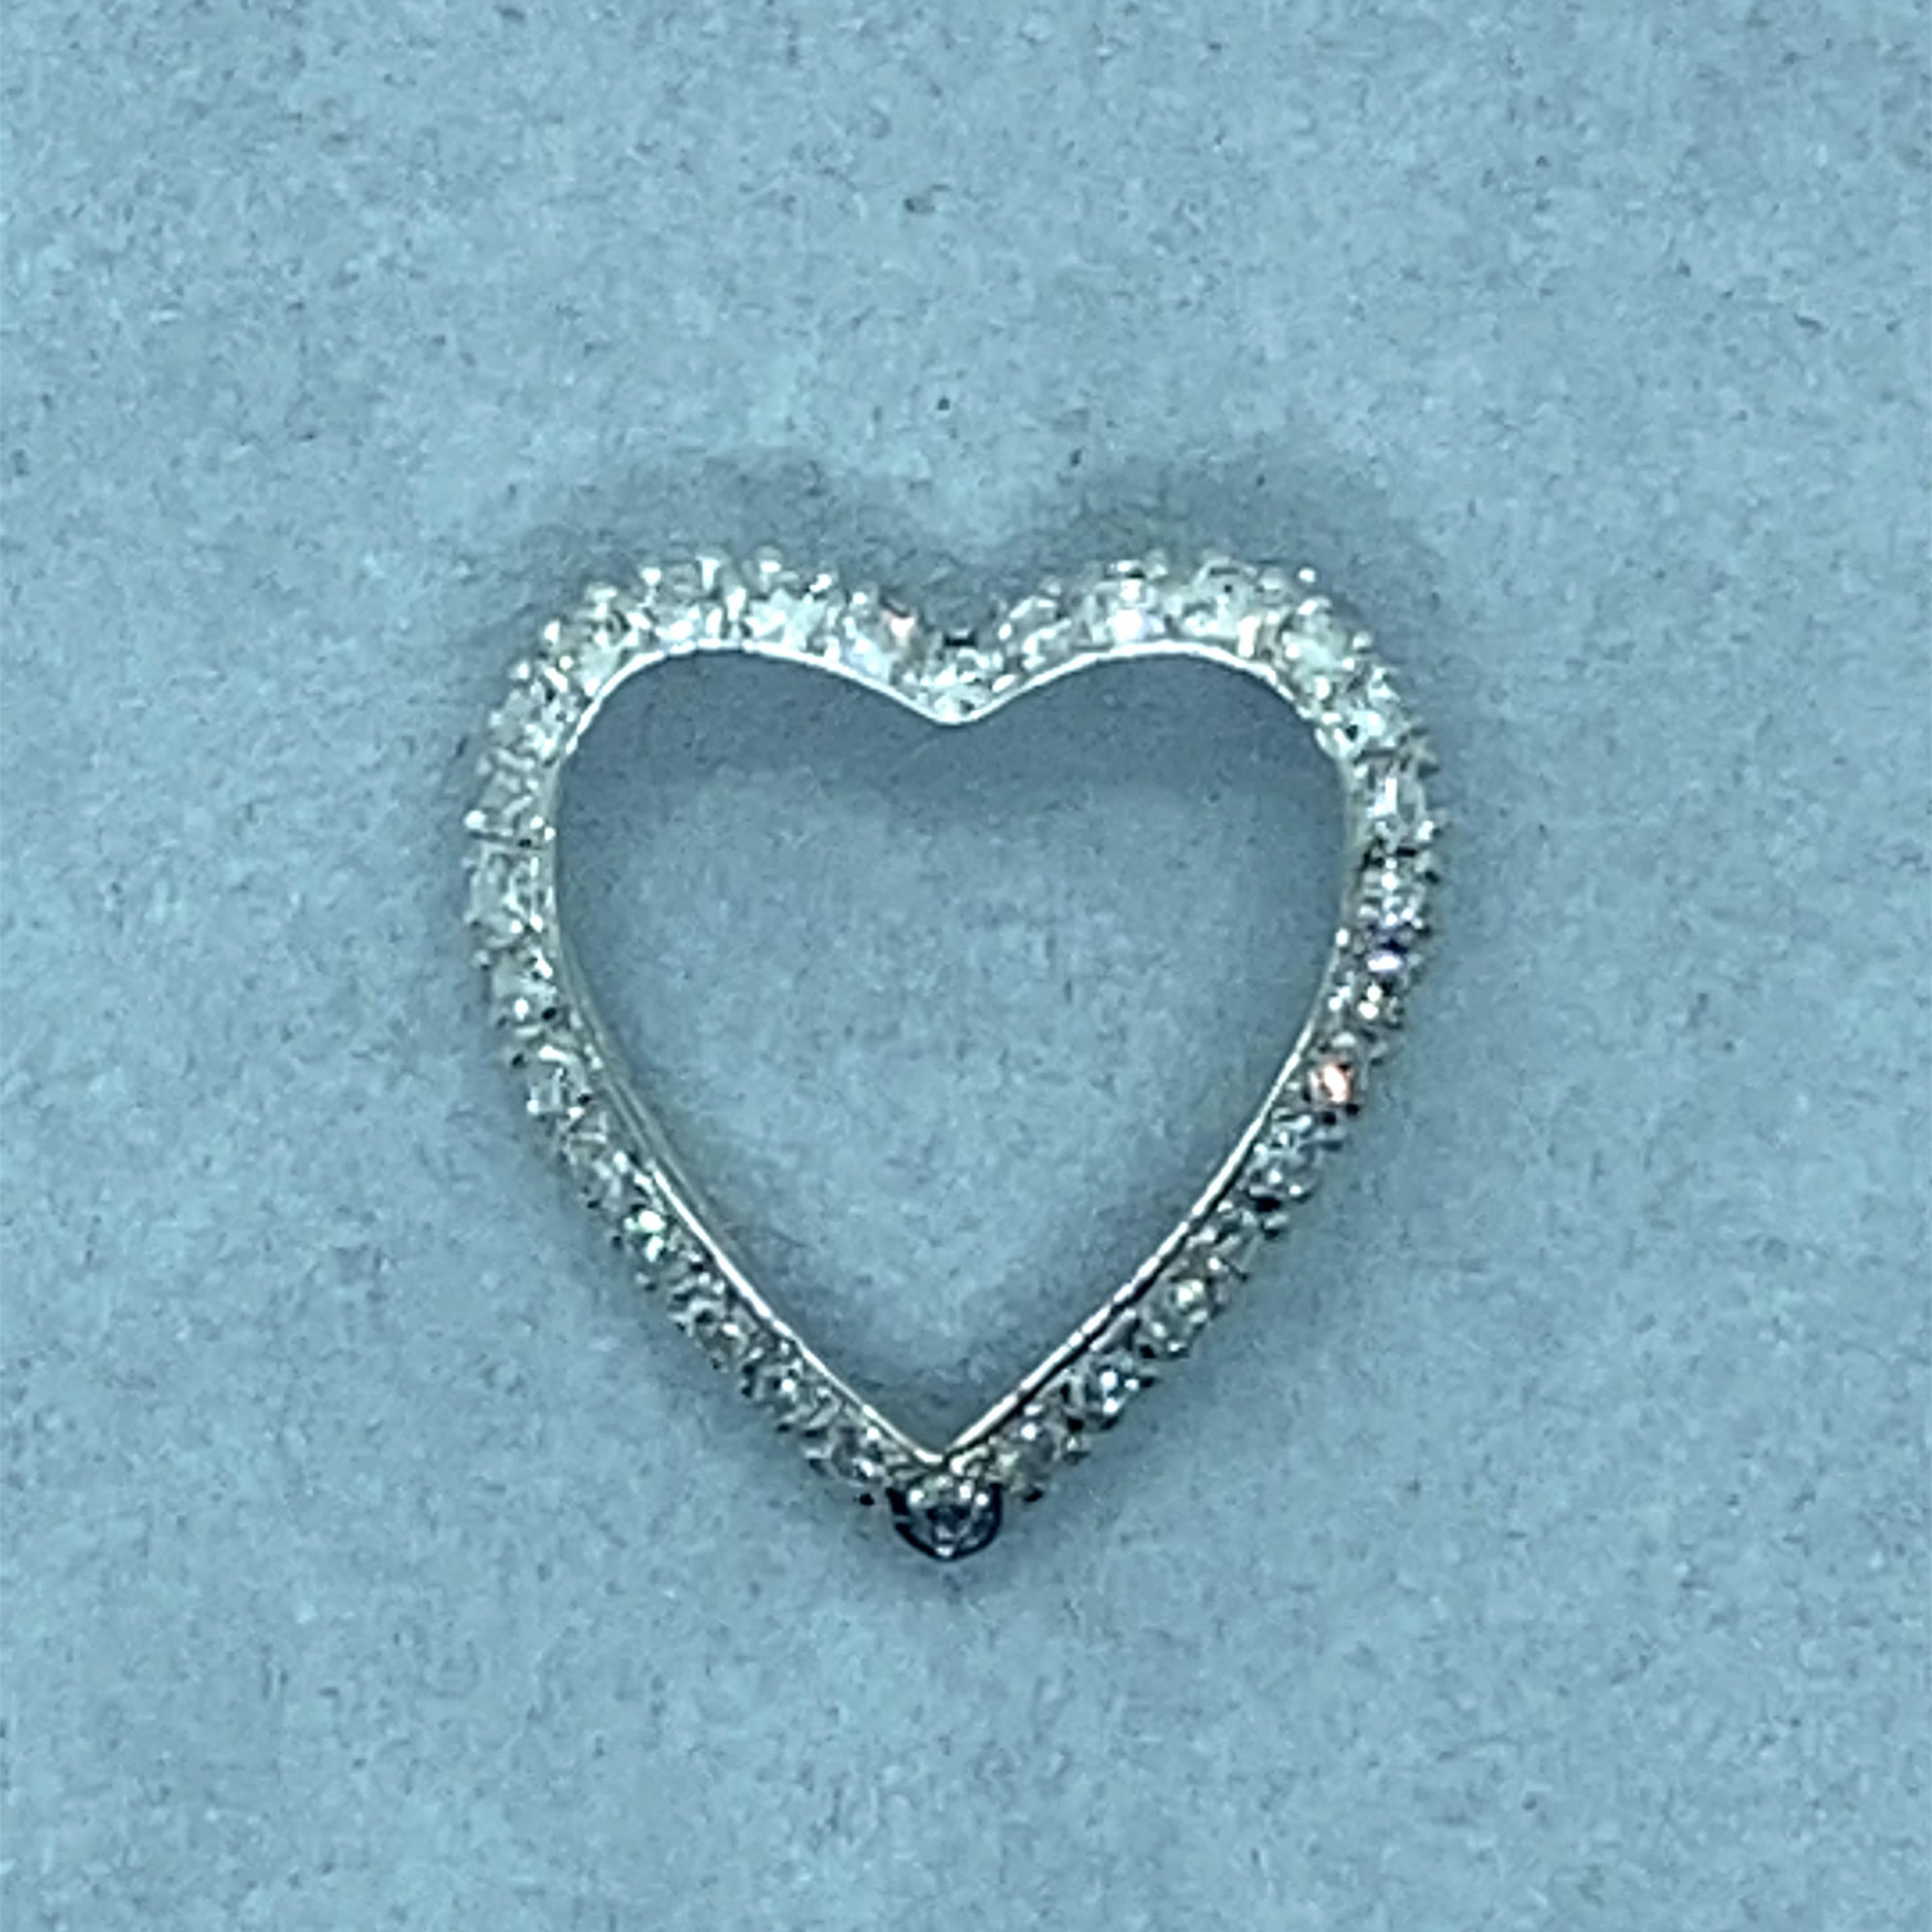 Women's Vintage 1950’s White Gold Diamond Heart Pin and Pendant For Sale